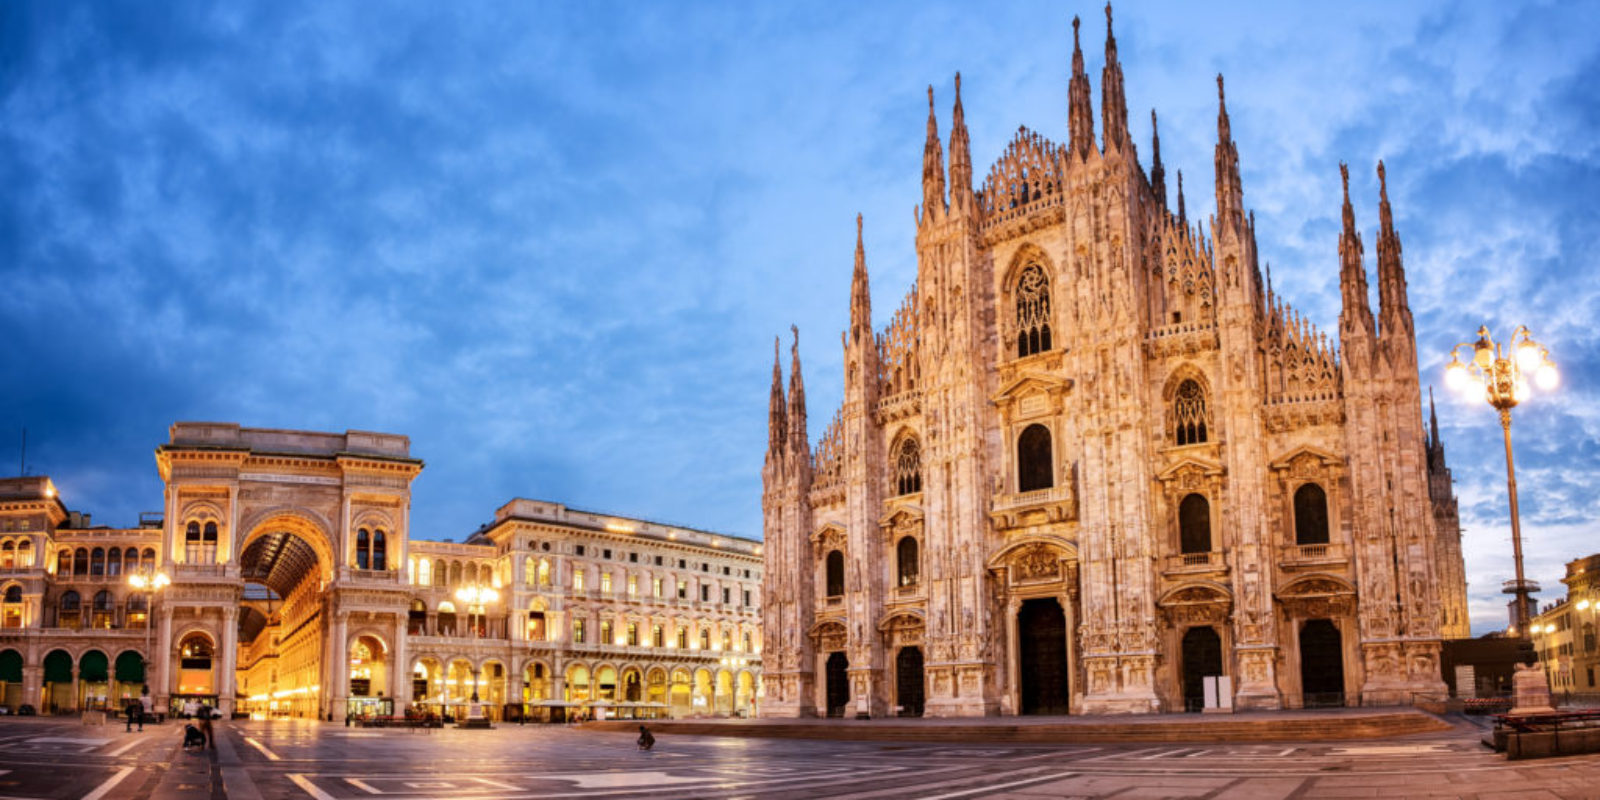 Where the gently rolling hills of Tuscany end, Milan, Italy begins. This segues into the formidable Italian Alps, popular for skiing, spa resorts, and ...